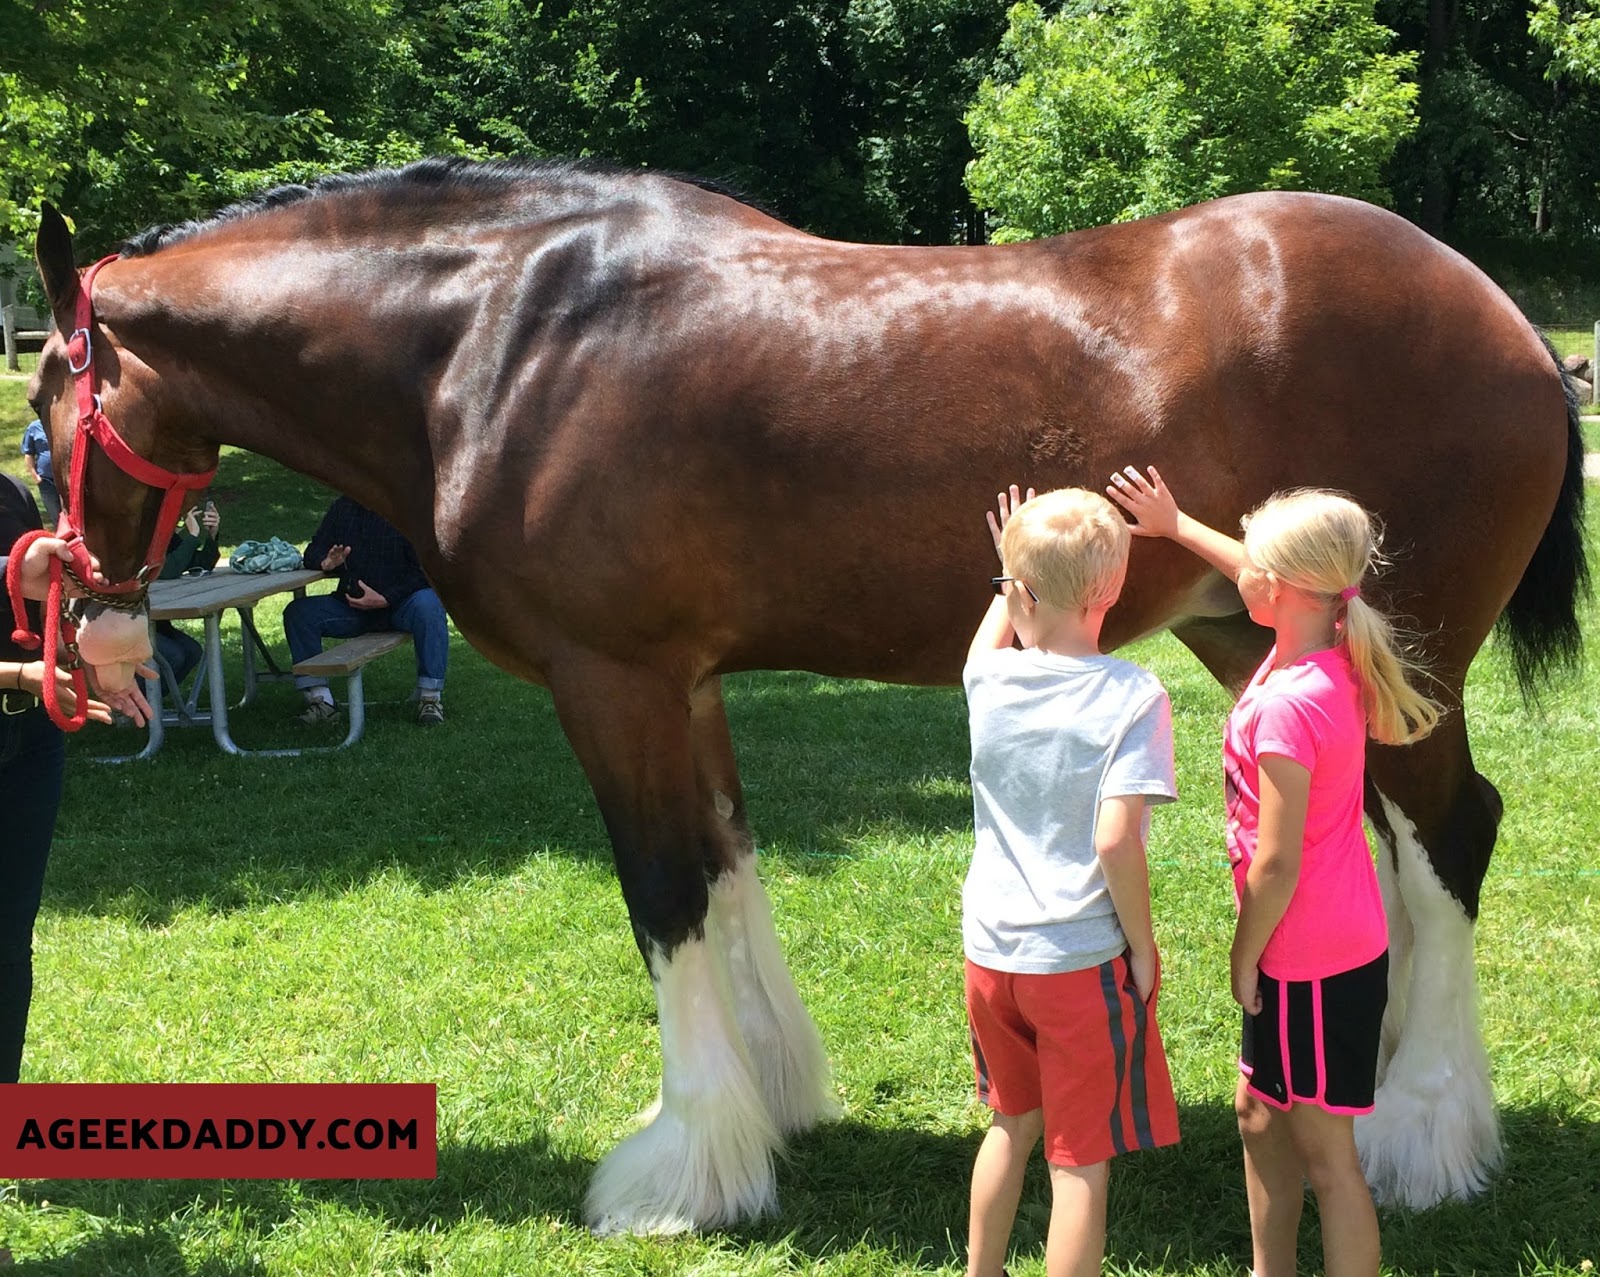 A GEEK DADDY: FUN FACTS ABOUT CLYDESDALES